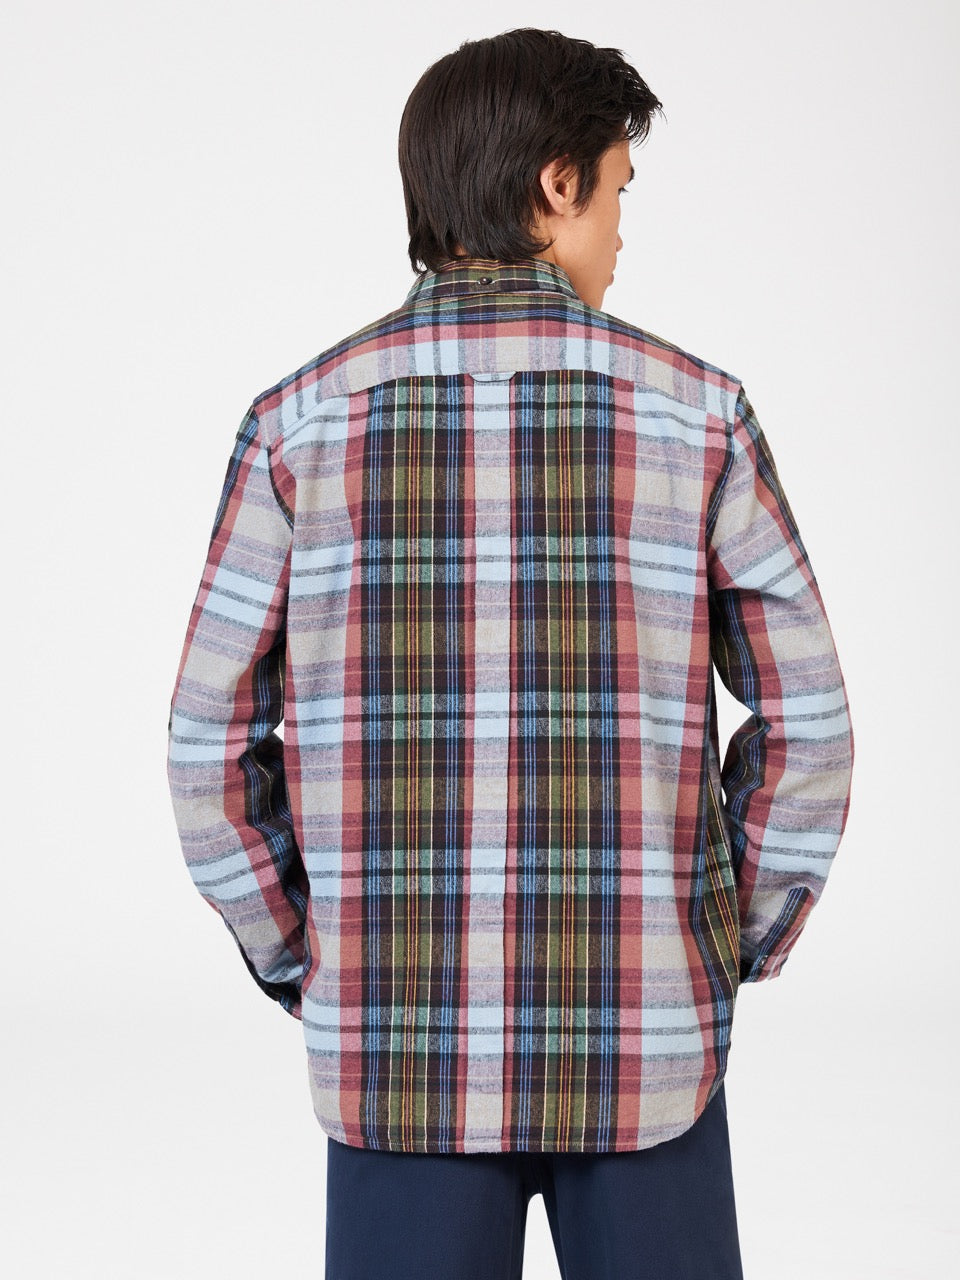 Brushed Multicolour Check Oxford Shirt